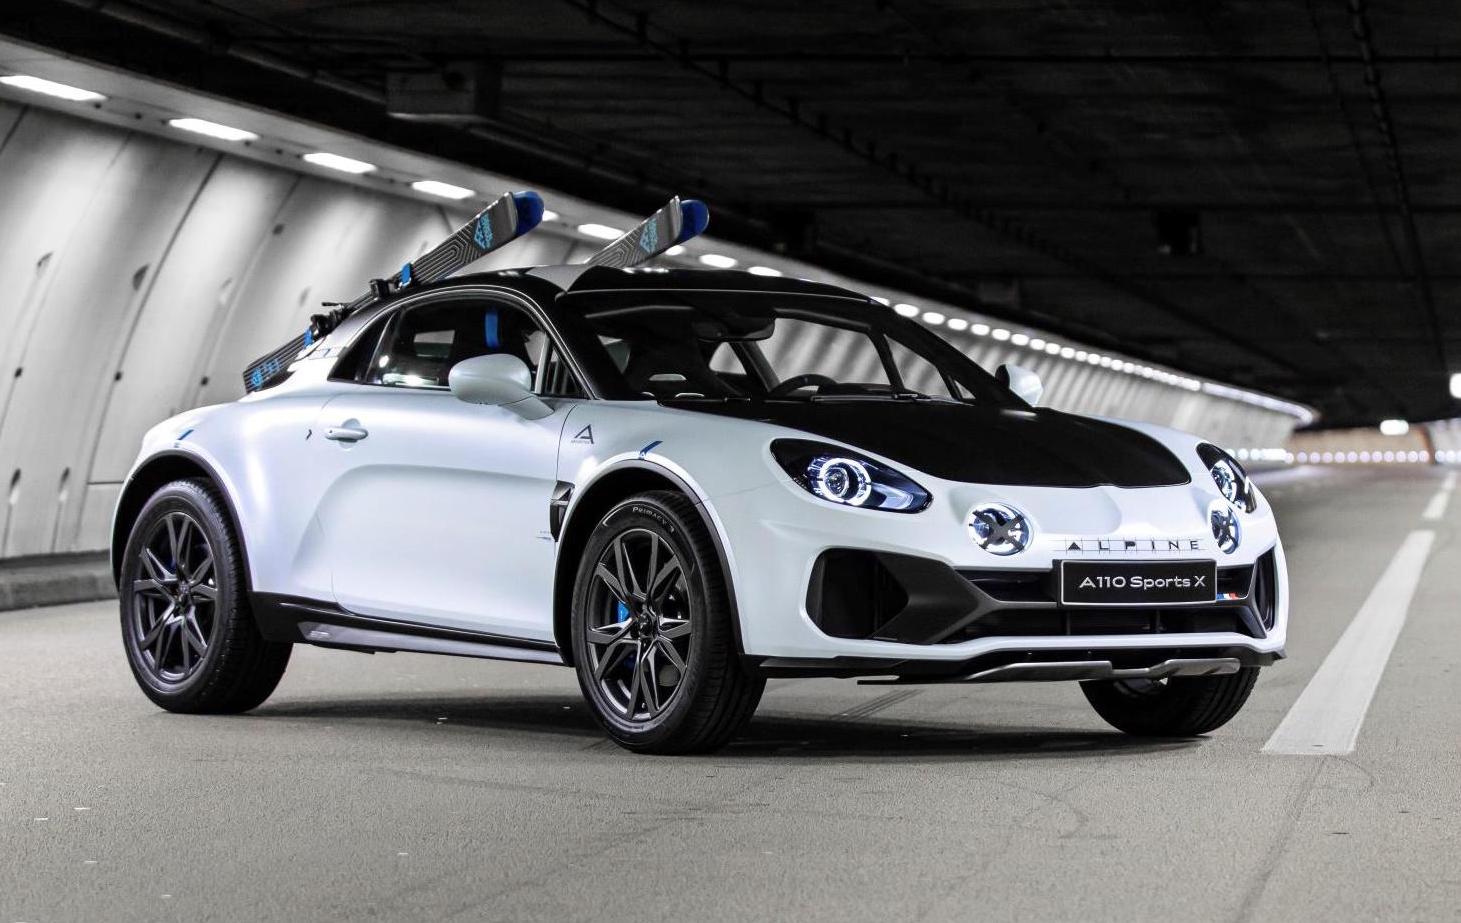 Alpine A110 SportsX concept revealed, inspired by 1970s WRC car